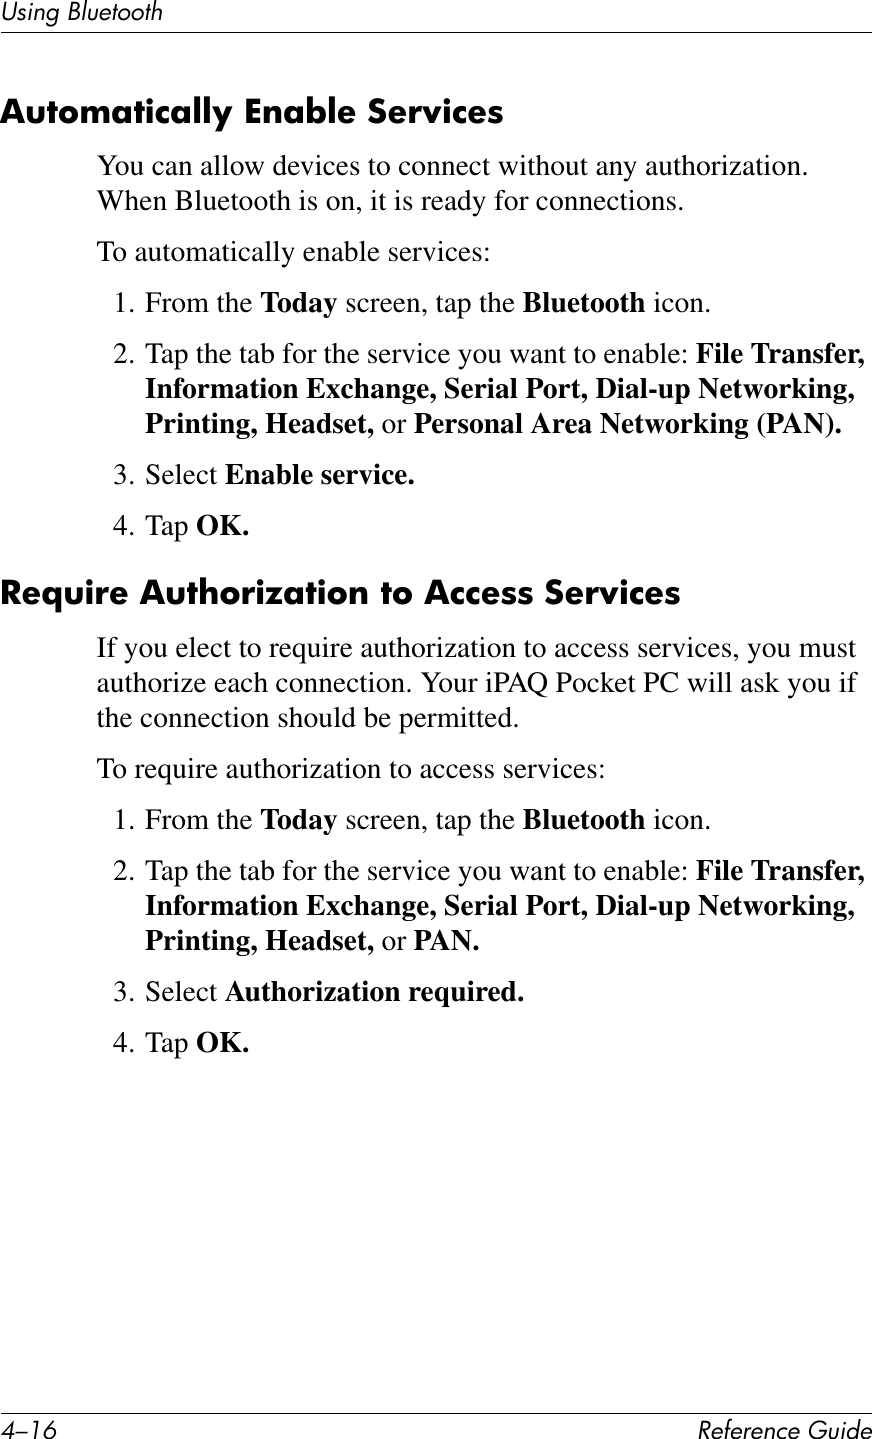 C/.E !&quot;#&quot;$&quot;%&amp;&quot;&apos;()*+&quot;UL*%2&apos;PK)&quot;1771Q,(76I;7)%;@@O&amp;^$;W@&quot;&amp;:&quot;!N)%&quot;8You can allow devices to connect without any authorization. When Bluetooth is on, it is ready for connections.To automatically enable services:1. From the Today screen, tap the Bluetooth icon.2. Tap the tab for the service you want to enable: File Transfer, Information Exchange, Serial Port, Dial-up Networking, Printing, Headset, or Personal Area Networking (PAN).3. Select Enable service.4. Tap OK.-&quot;=()!&quot;&amp;,(7?6!)a;7)6$&amp;76&amp;,%%&quot;88&amp;:&quot;!N)%&quot;8If you elect to require authorization to access services, you must authorize each connection. Your iPAQ Pocket PC will ask you if the connection should be permitted.To require authorization to access services:1. From the Today screen, tap the Bluetooth icon.2. Tap the tab for the service you want to enable: File Transfer, Information Exchange, Serial Port, Dial-up Networking, Printing, Headset, or PAN.3. Select Authorization required.4. Tap OK.